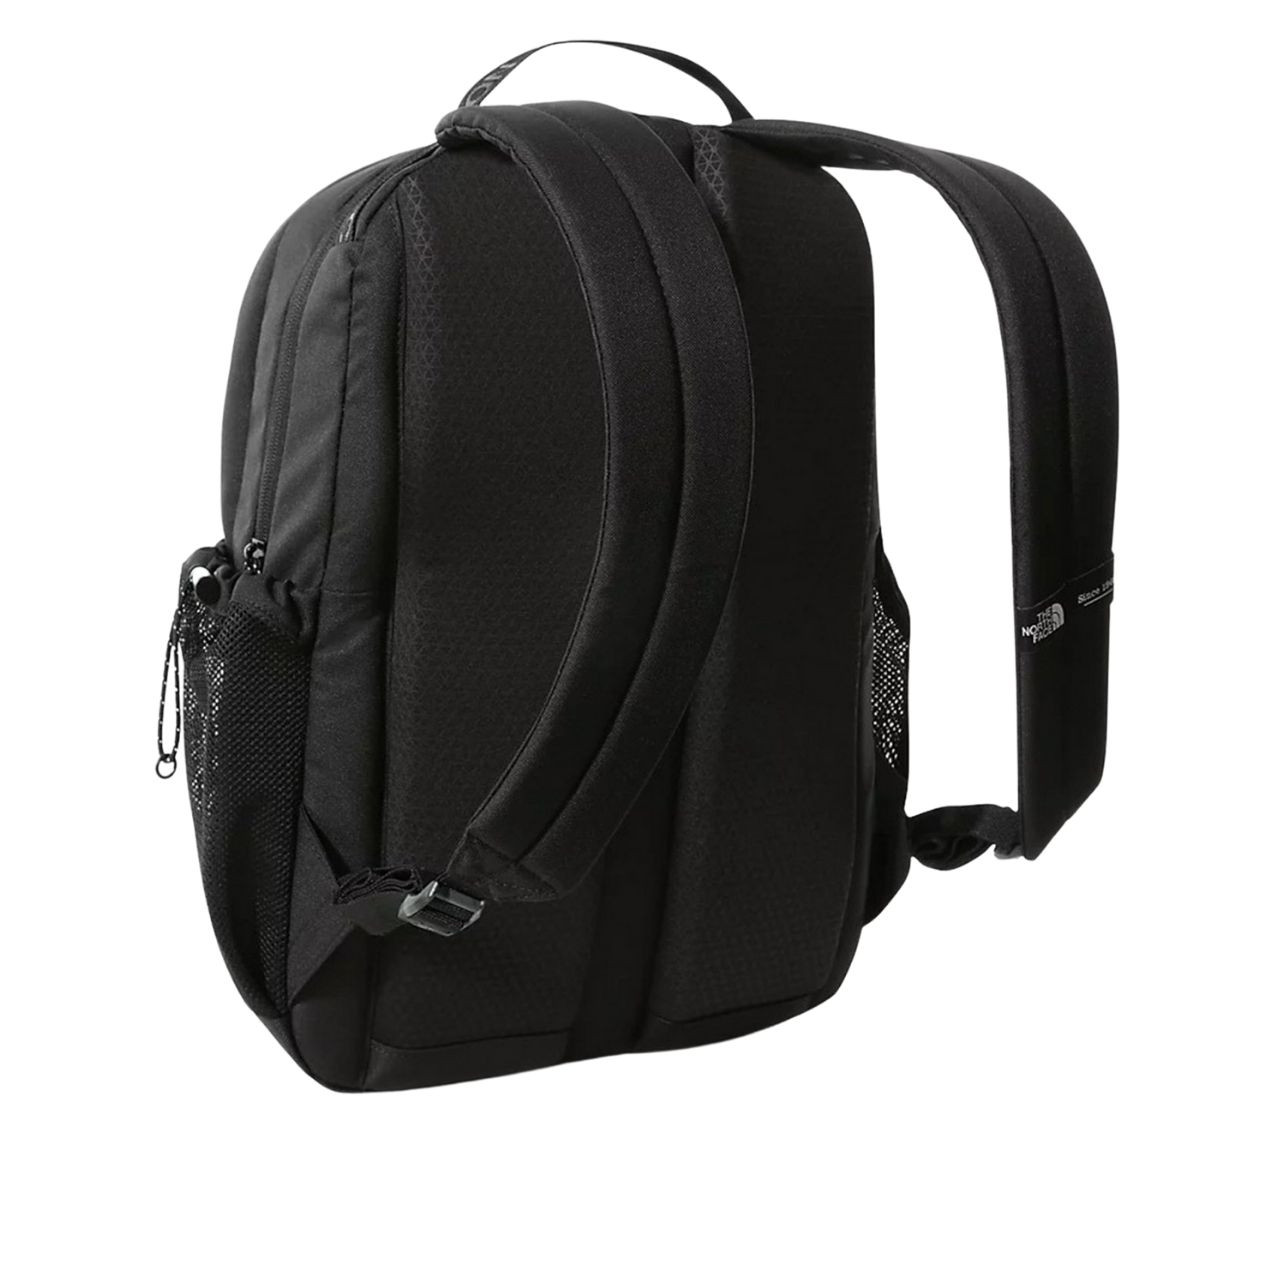 Рюкзак The North Face BOZER BACKPACK   NF0A52TBKX71 NF0A52TBKX71